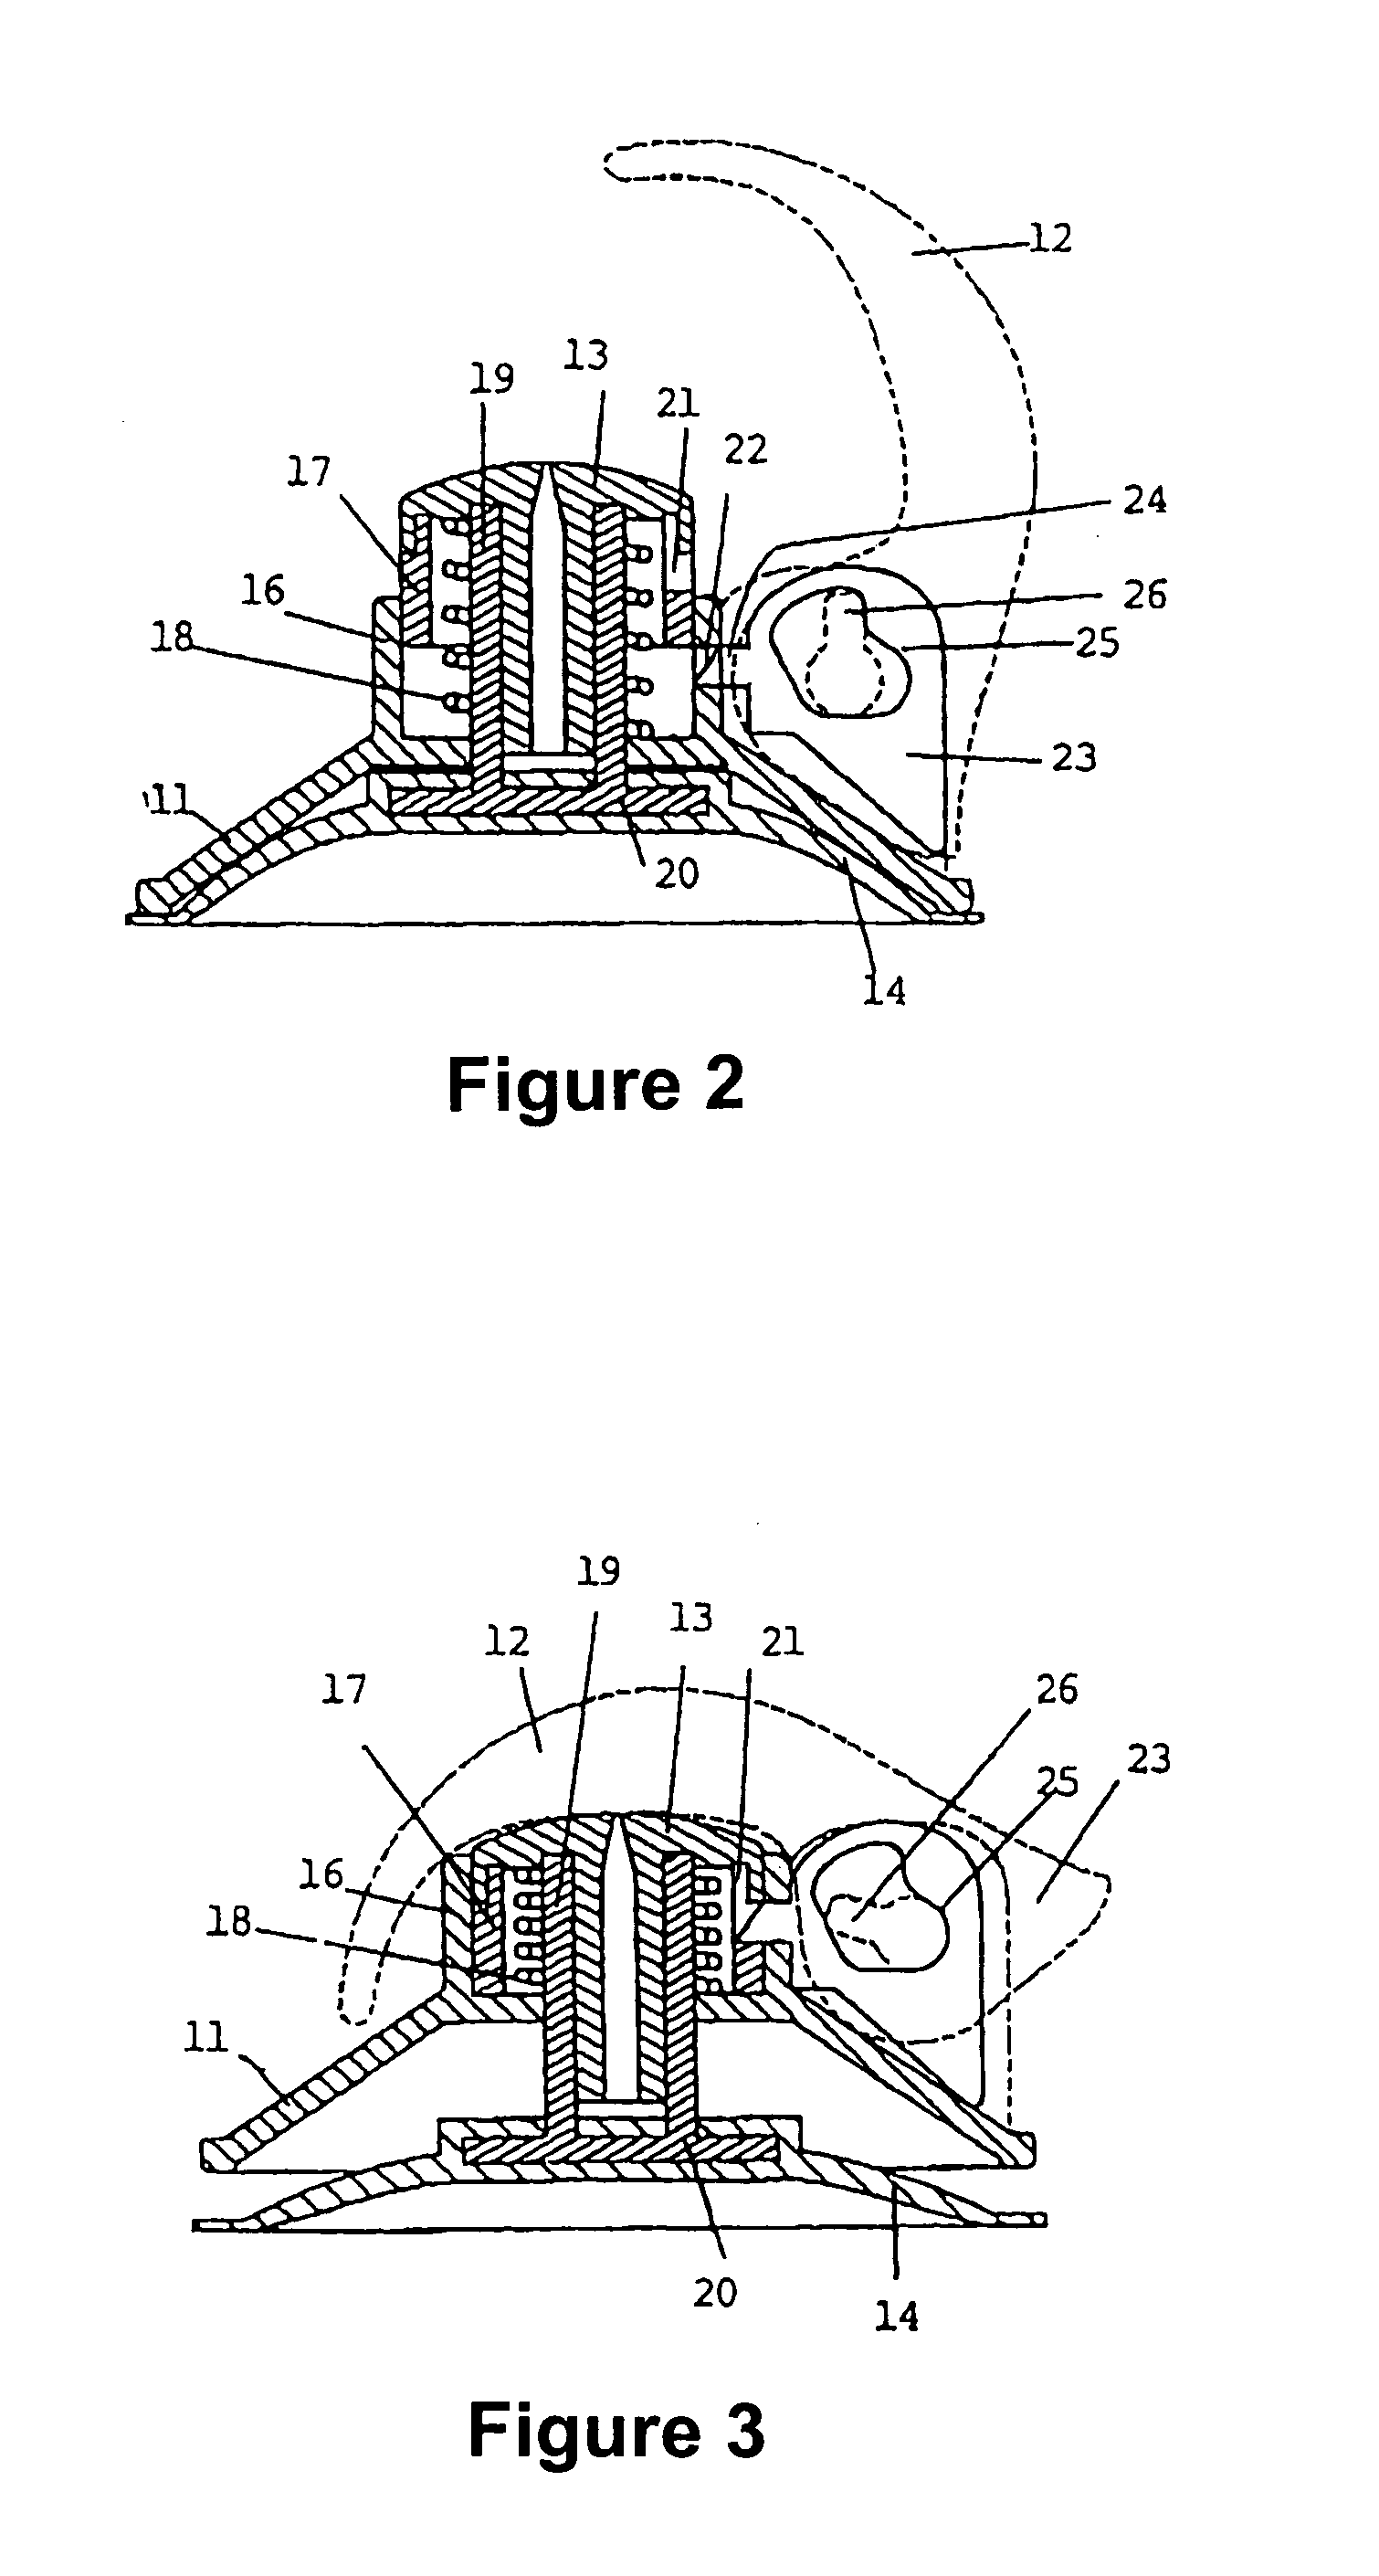 Suction-adhesive device